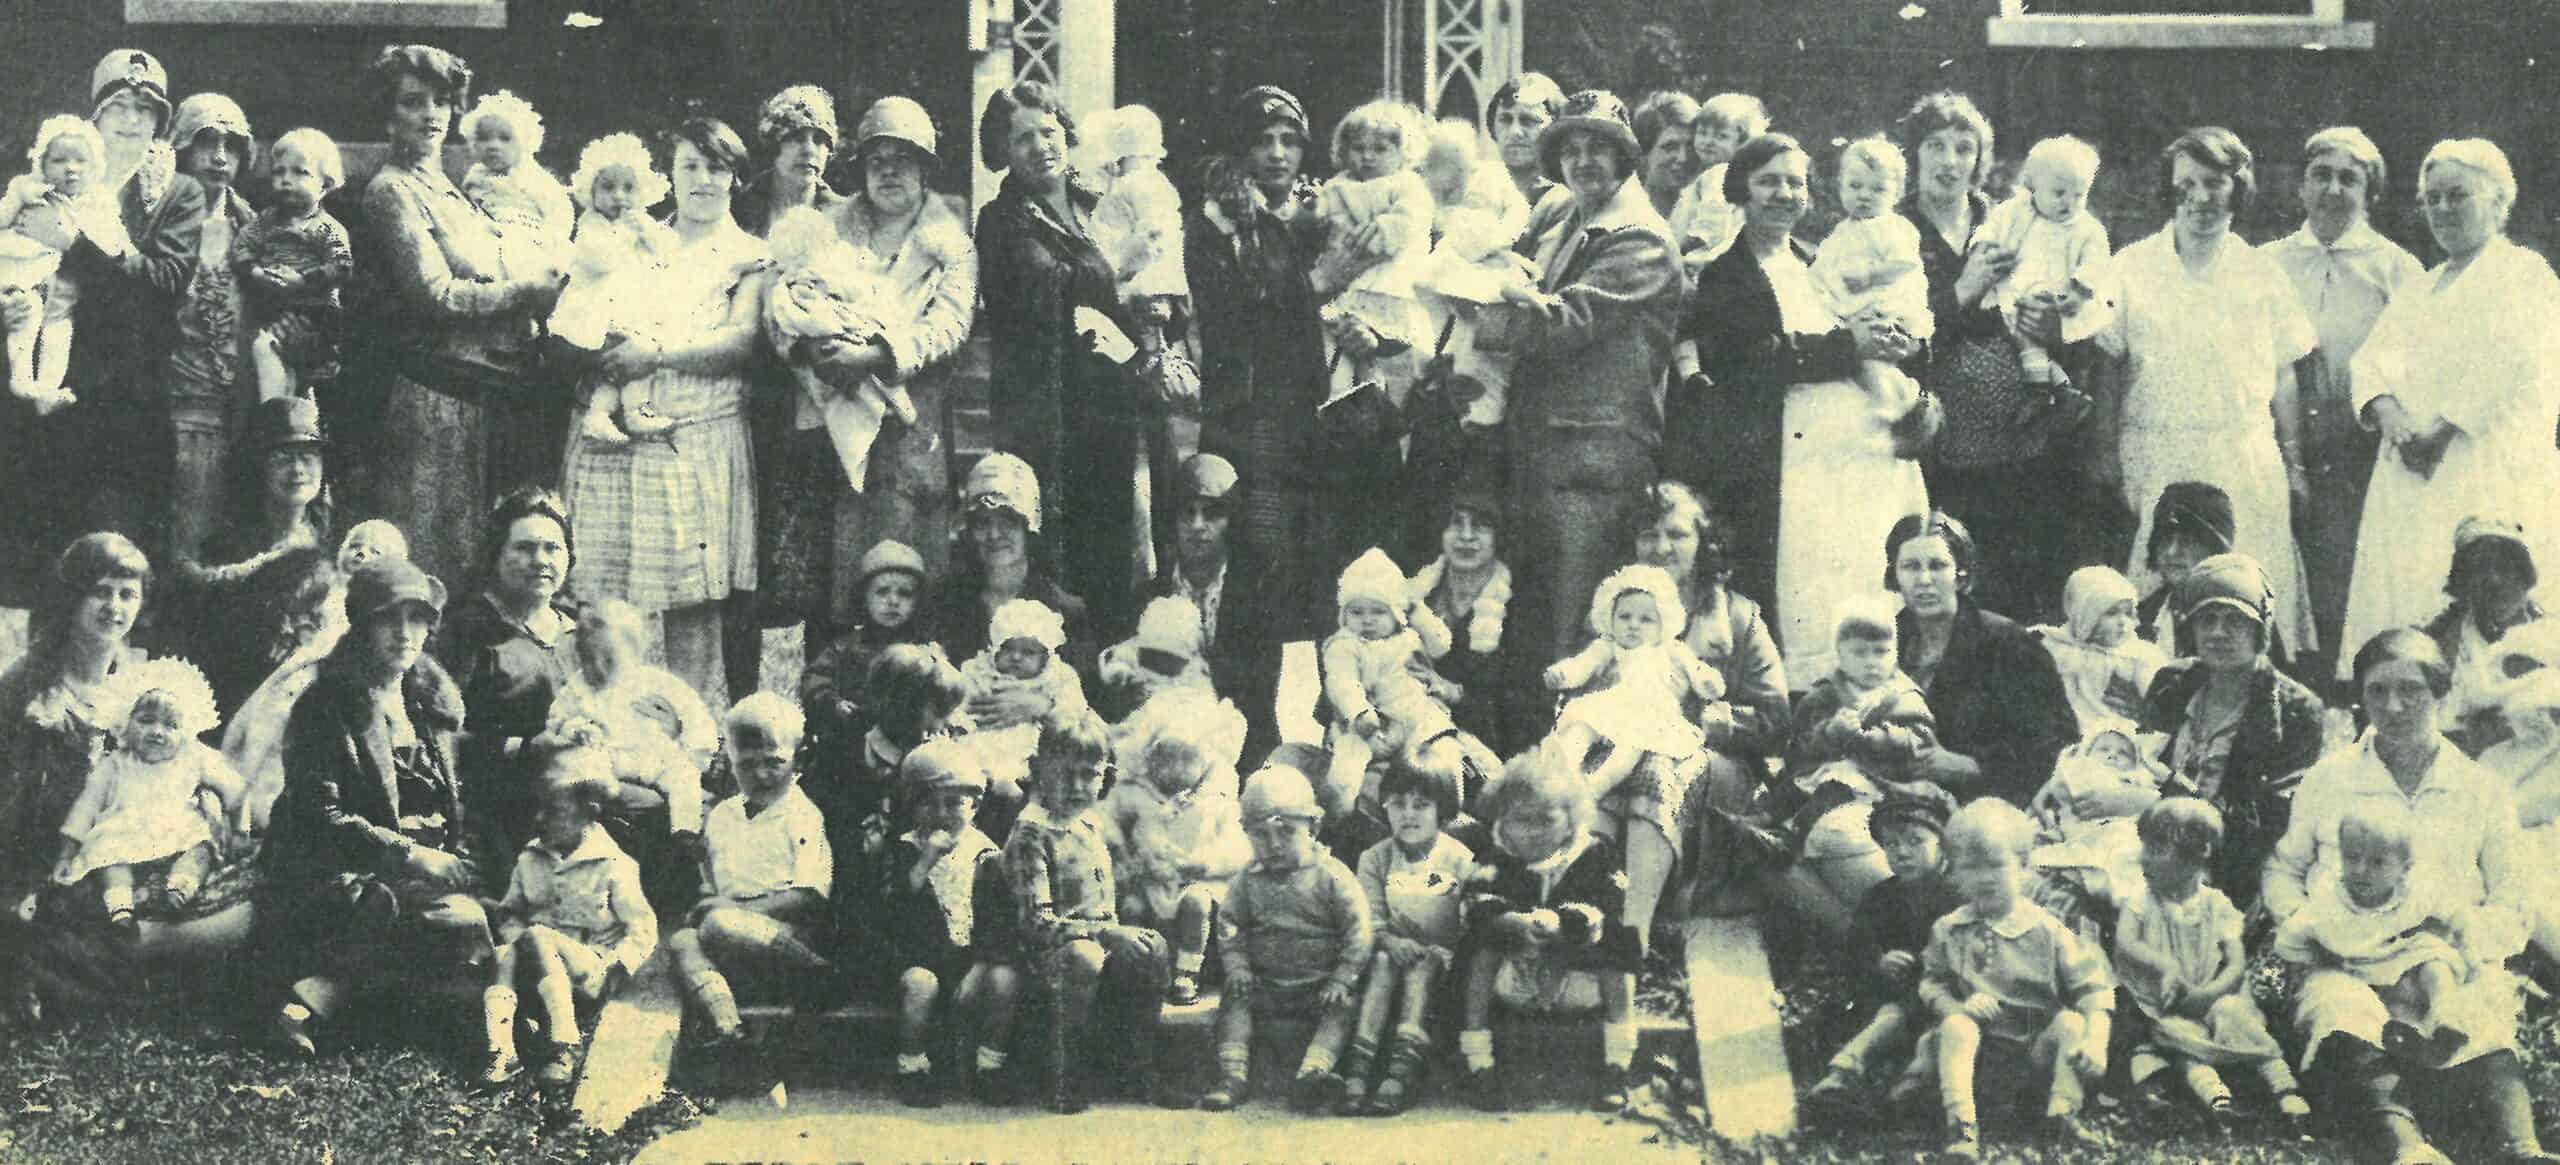 1921 Women and Children's Conference